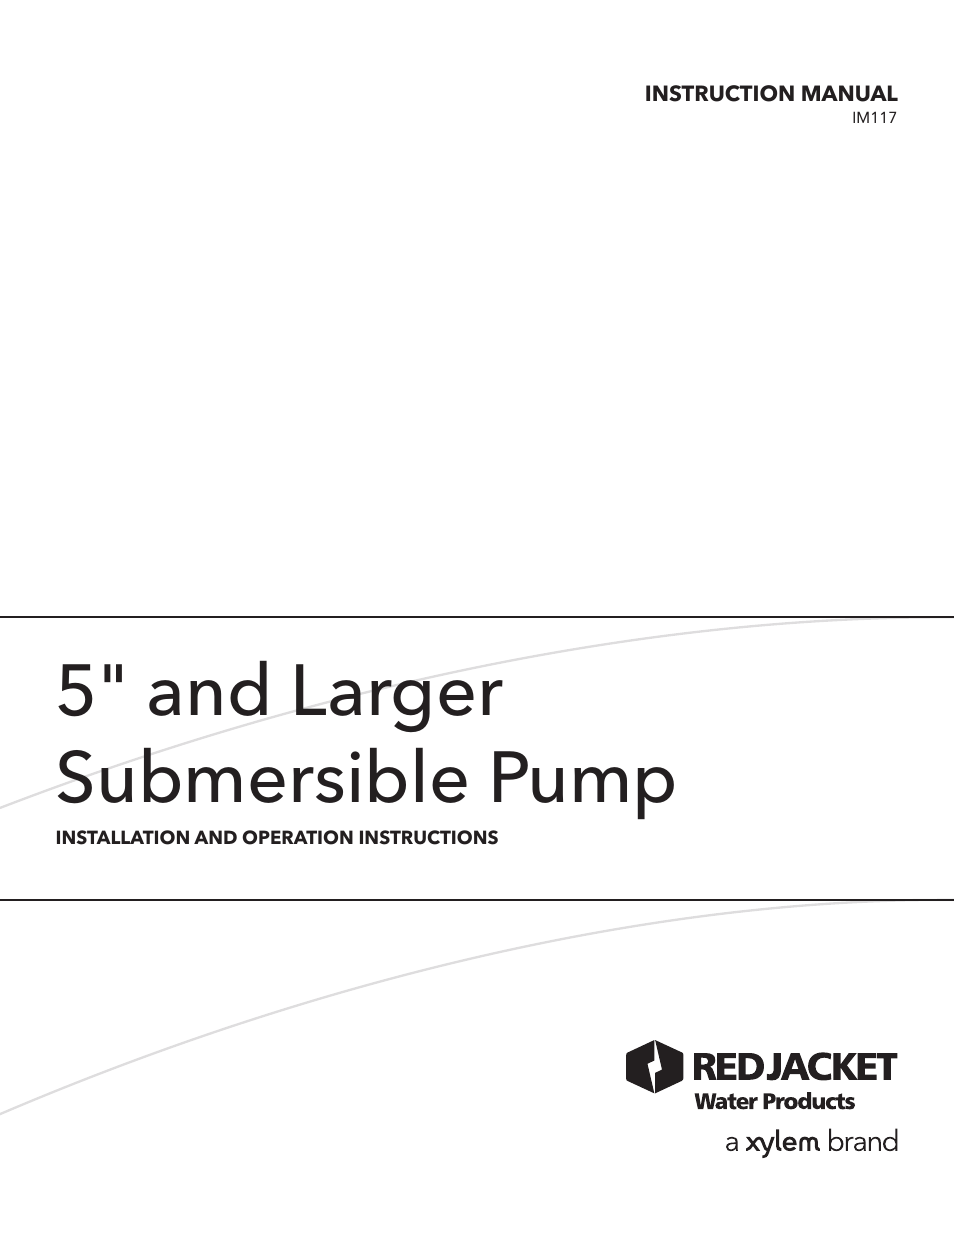 IM117 R01 5 and Larger Submersible Pump